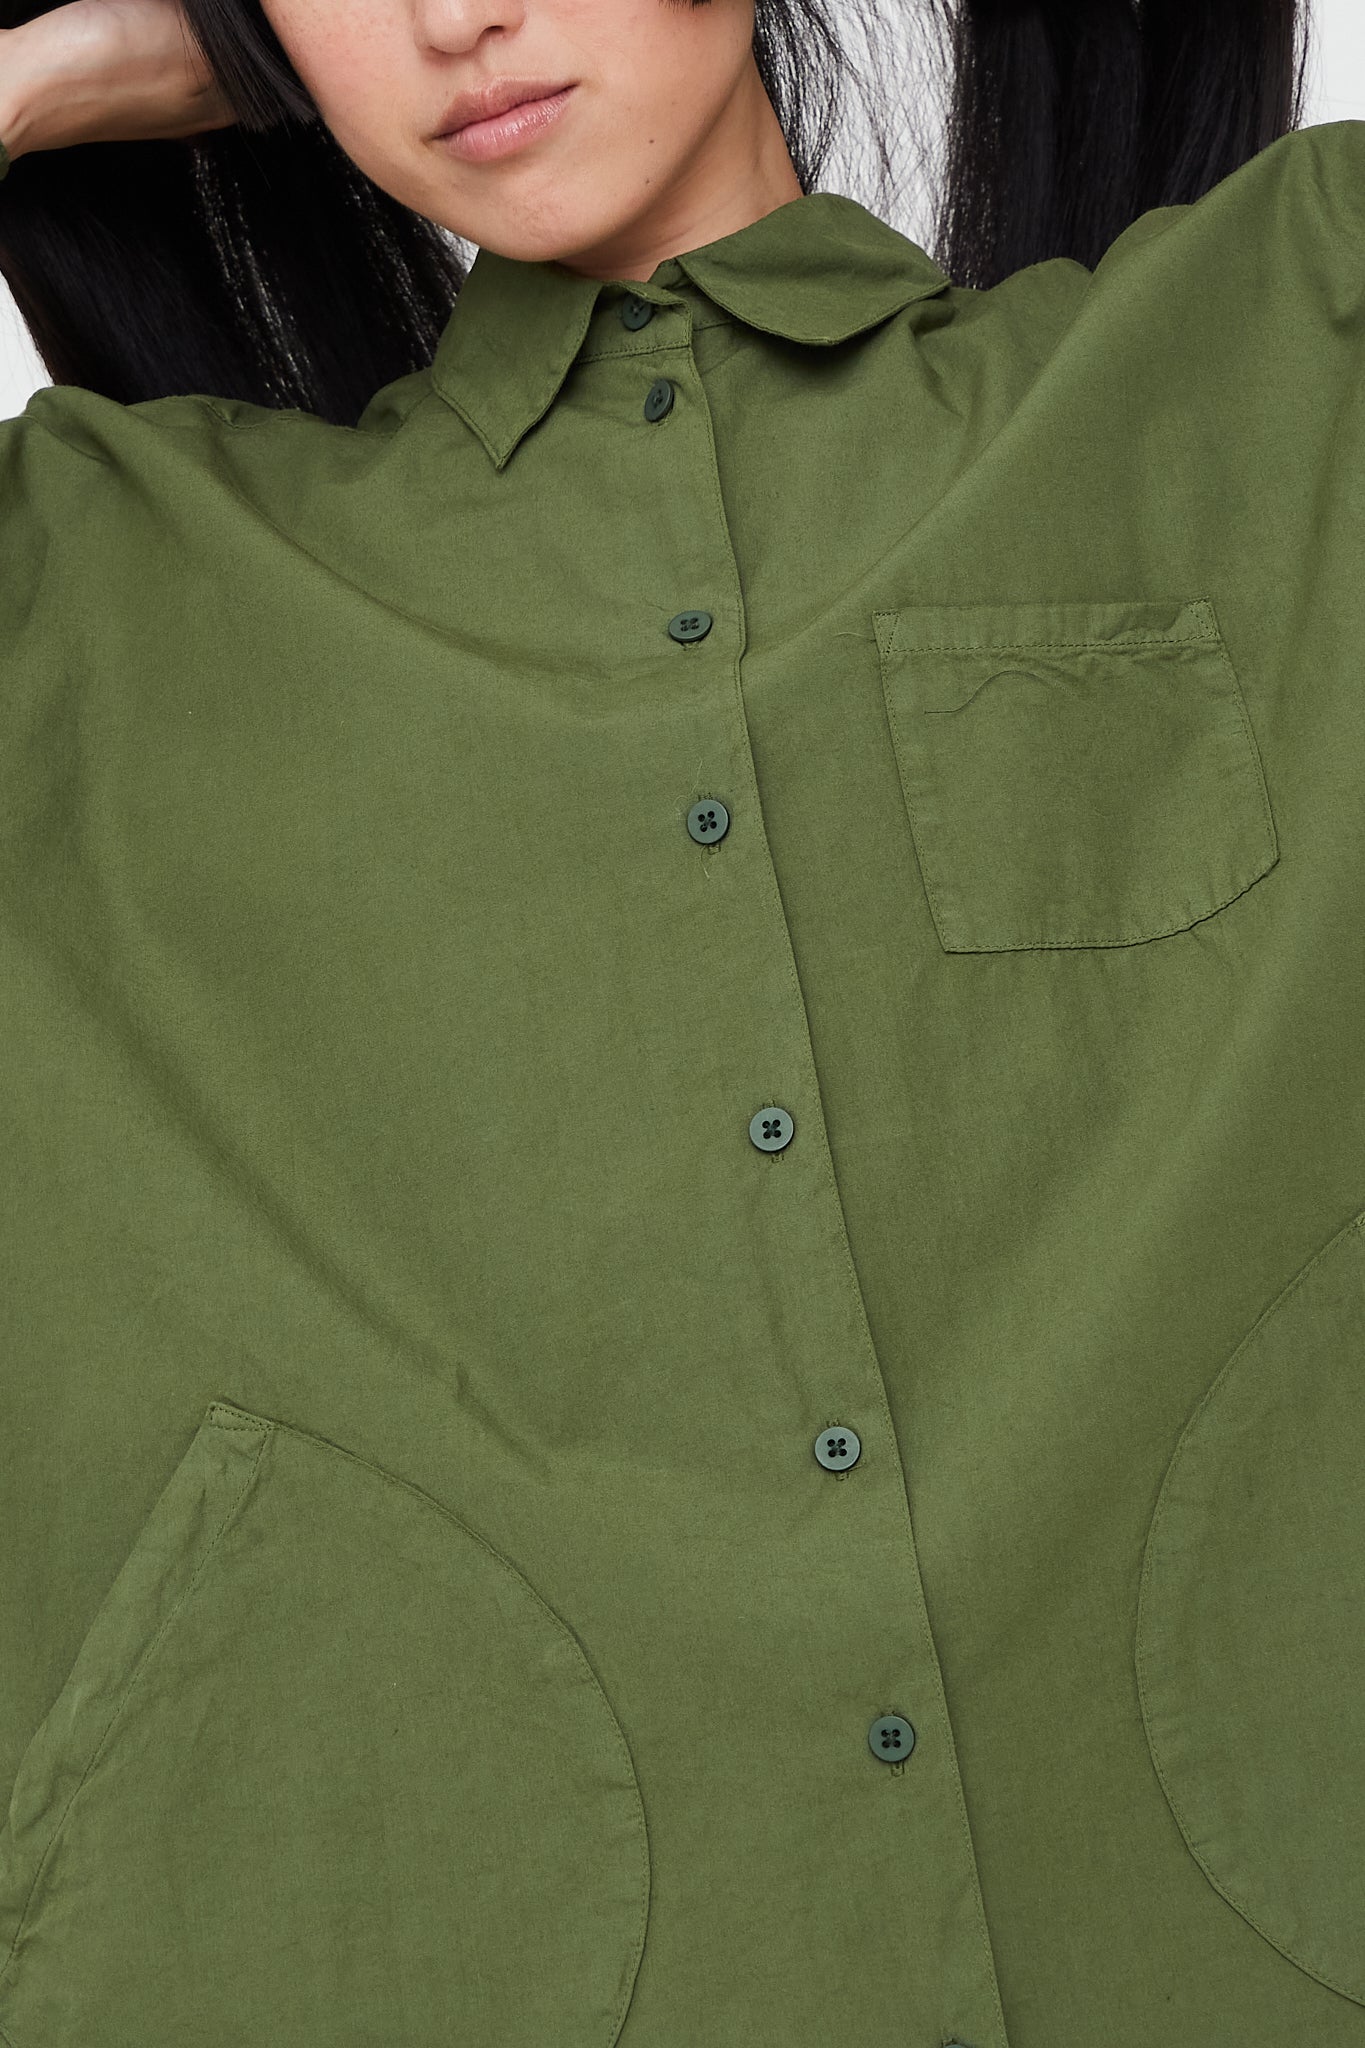 Okuda Cotton Poplin Shirt in Olive by Jesse Kamm for Oroboro Front Upclose